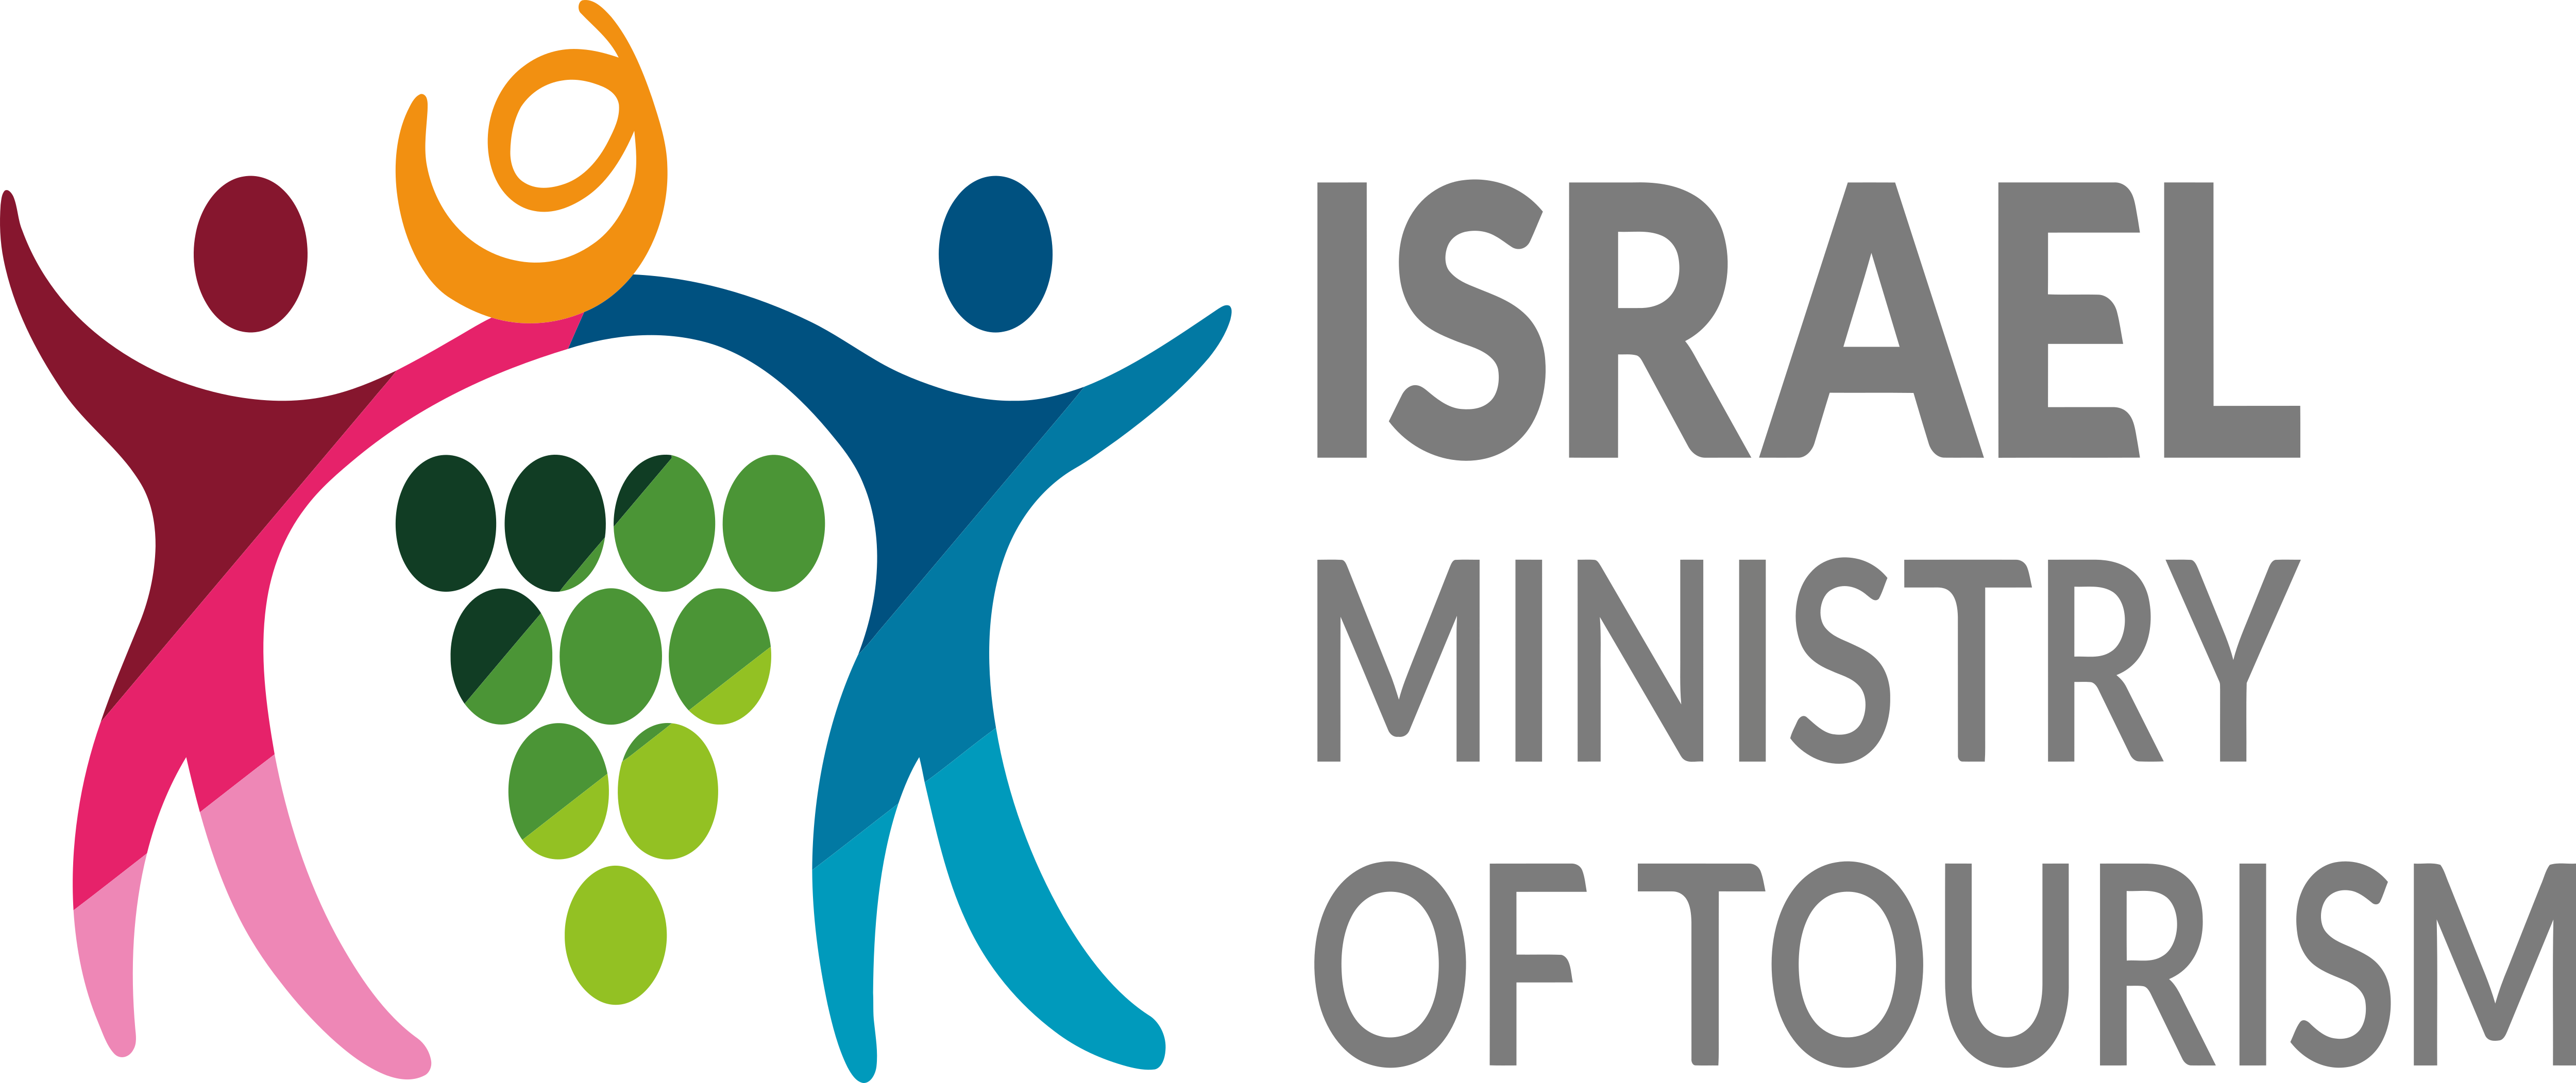 Israel_Ministry_of_Tourism_Logo-1-1.png